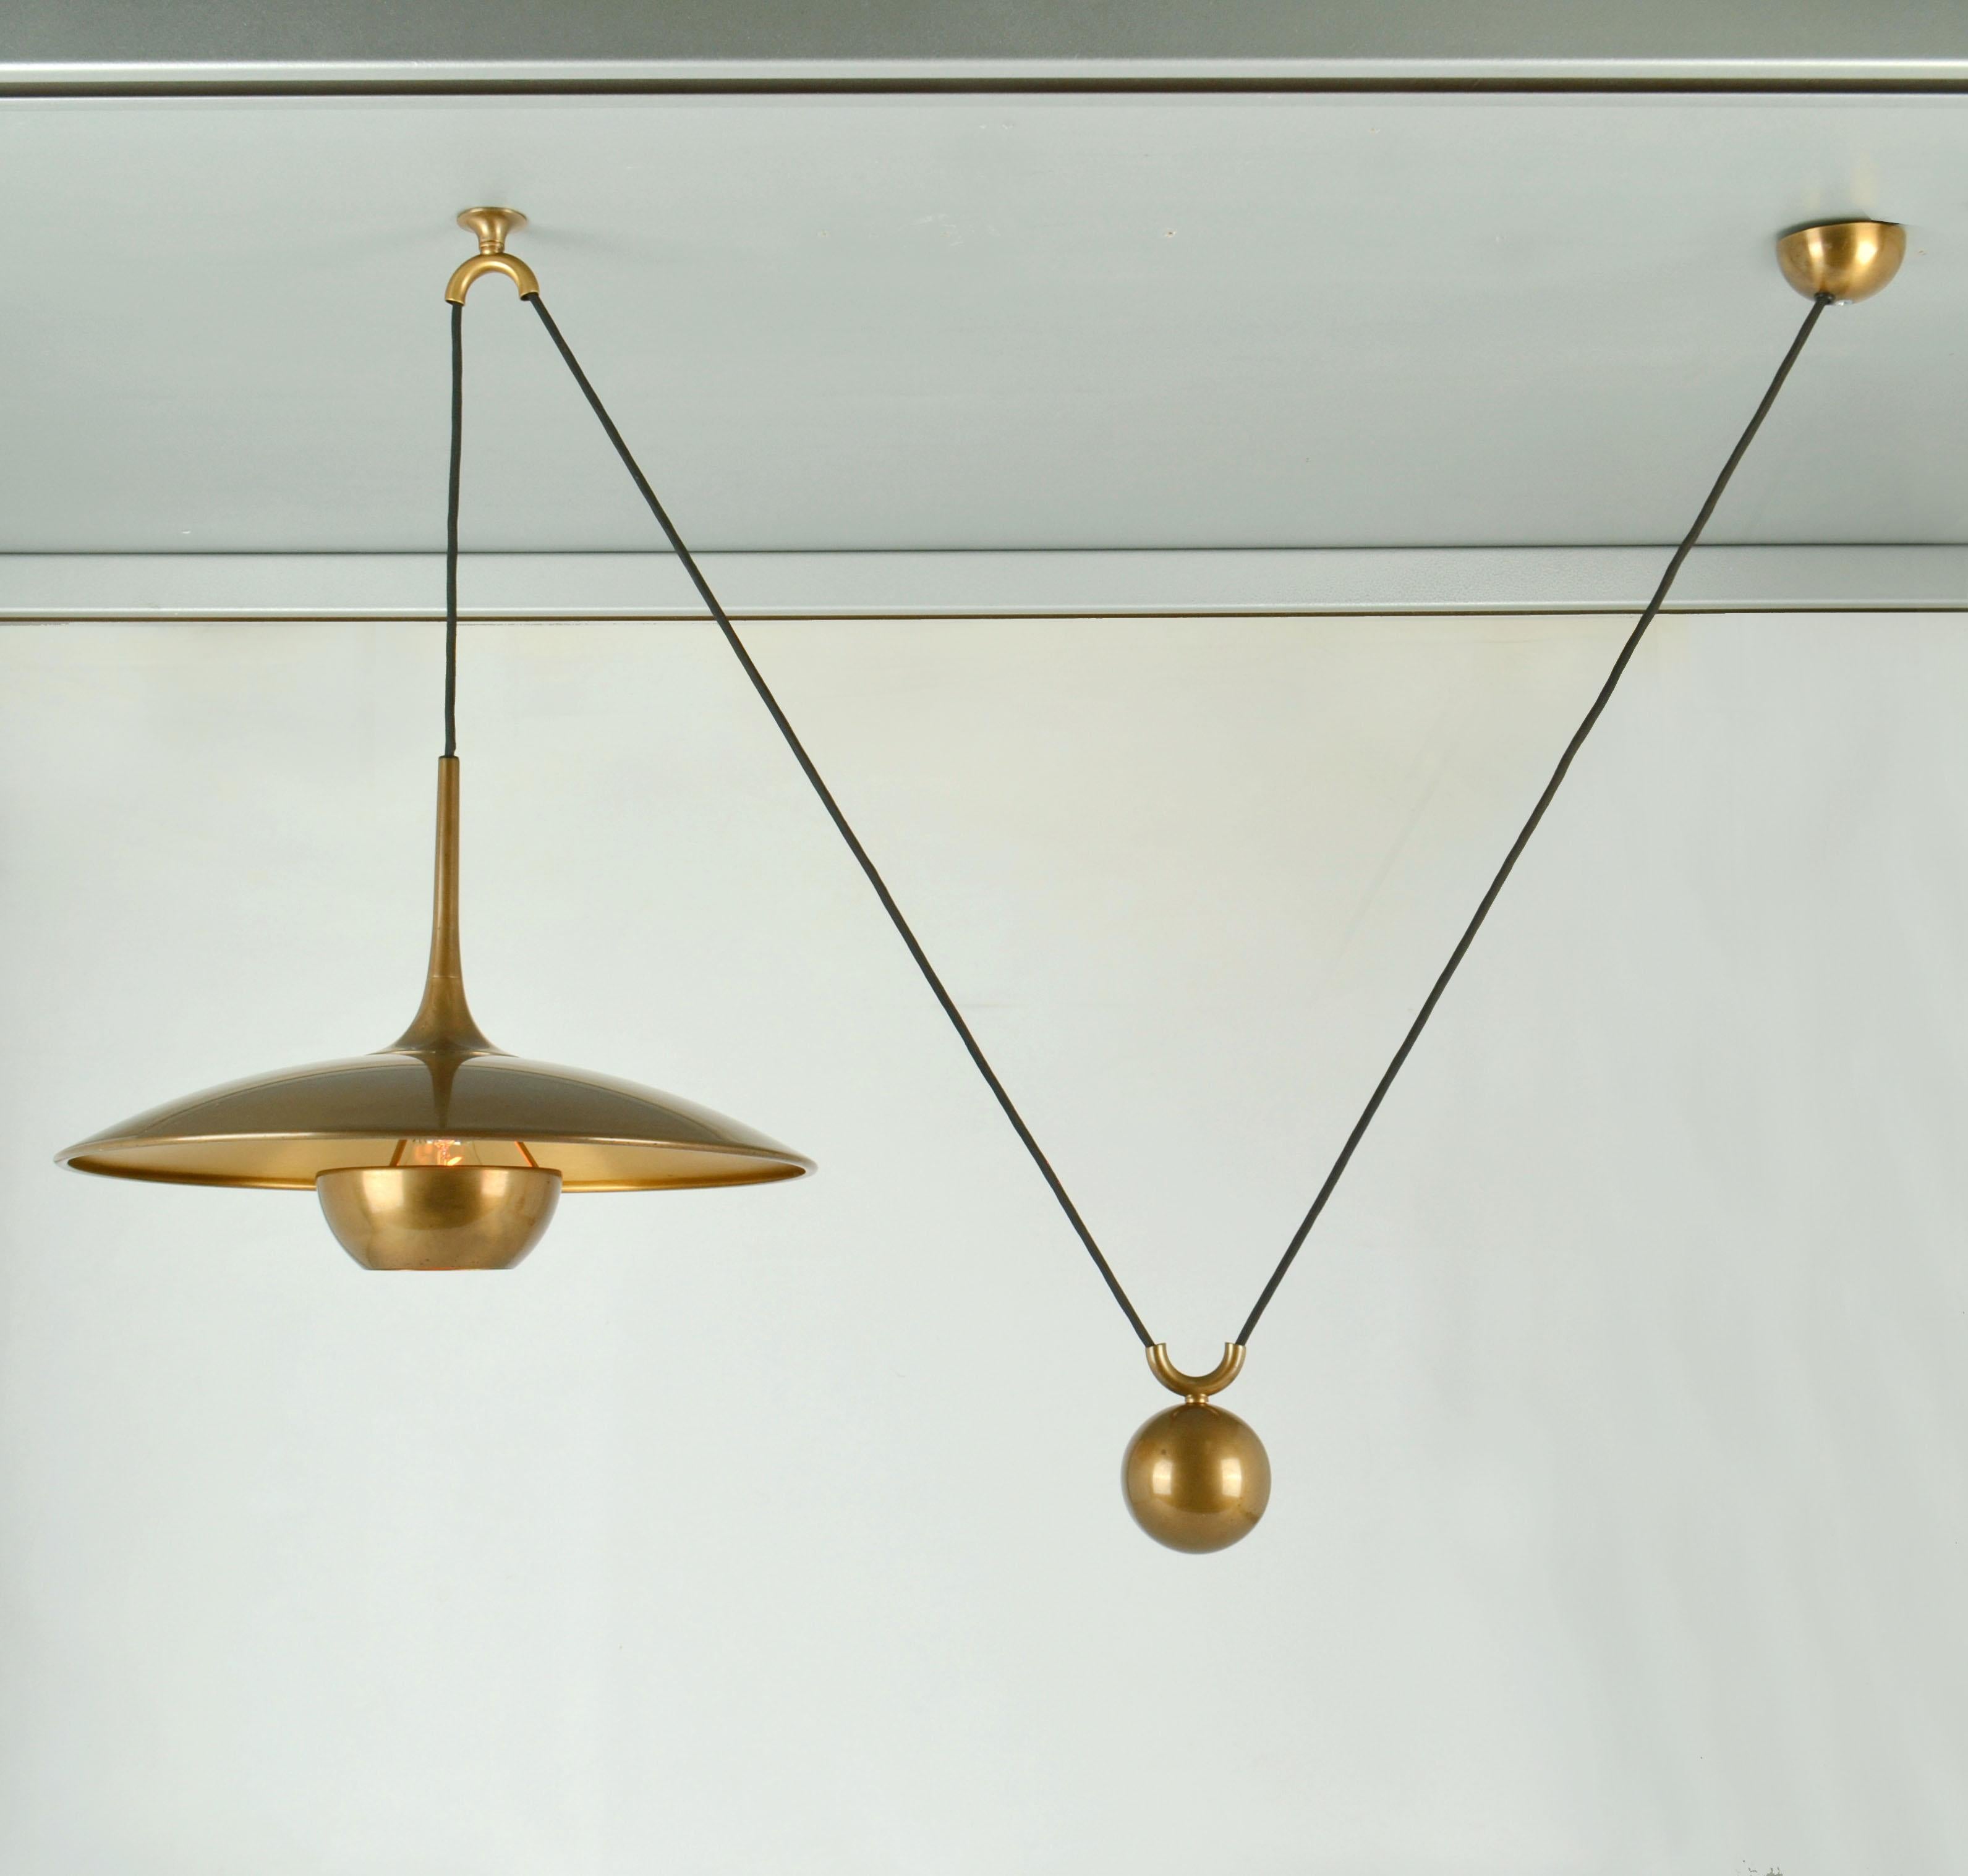 Mid-Century Modern Pendant Lamp Onos 40 in Brass by Florian Schulz 1960's, Counterbalance